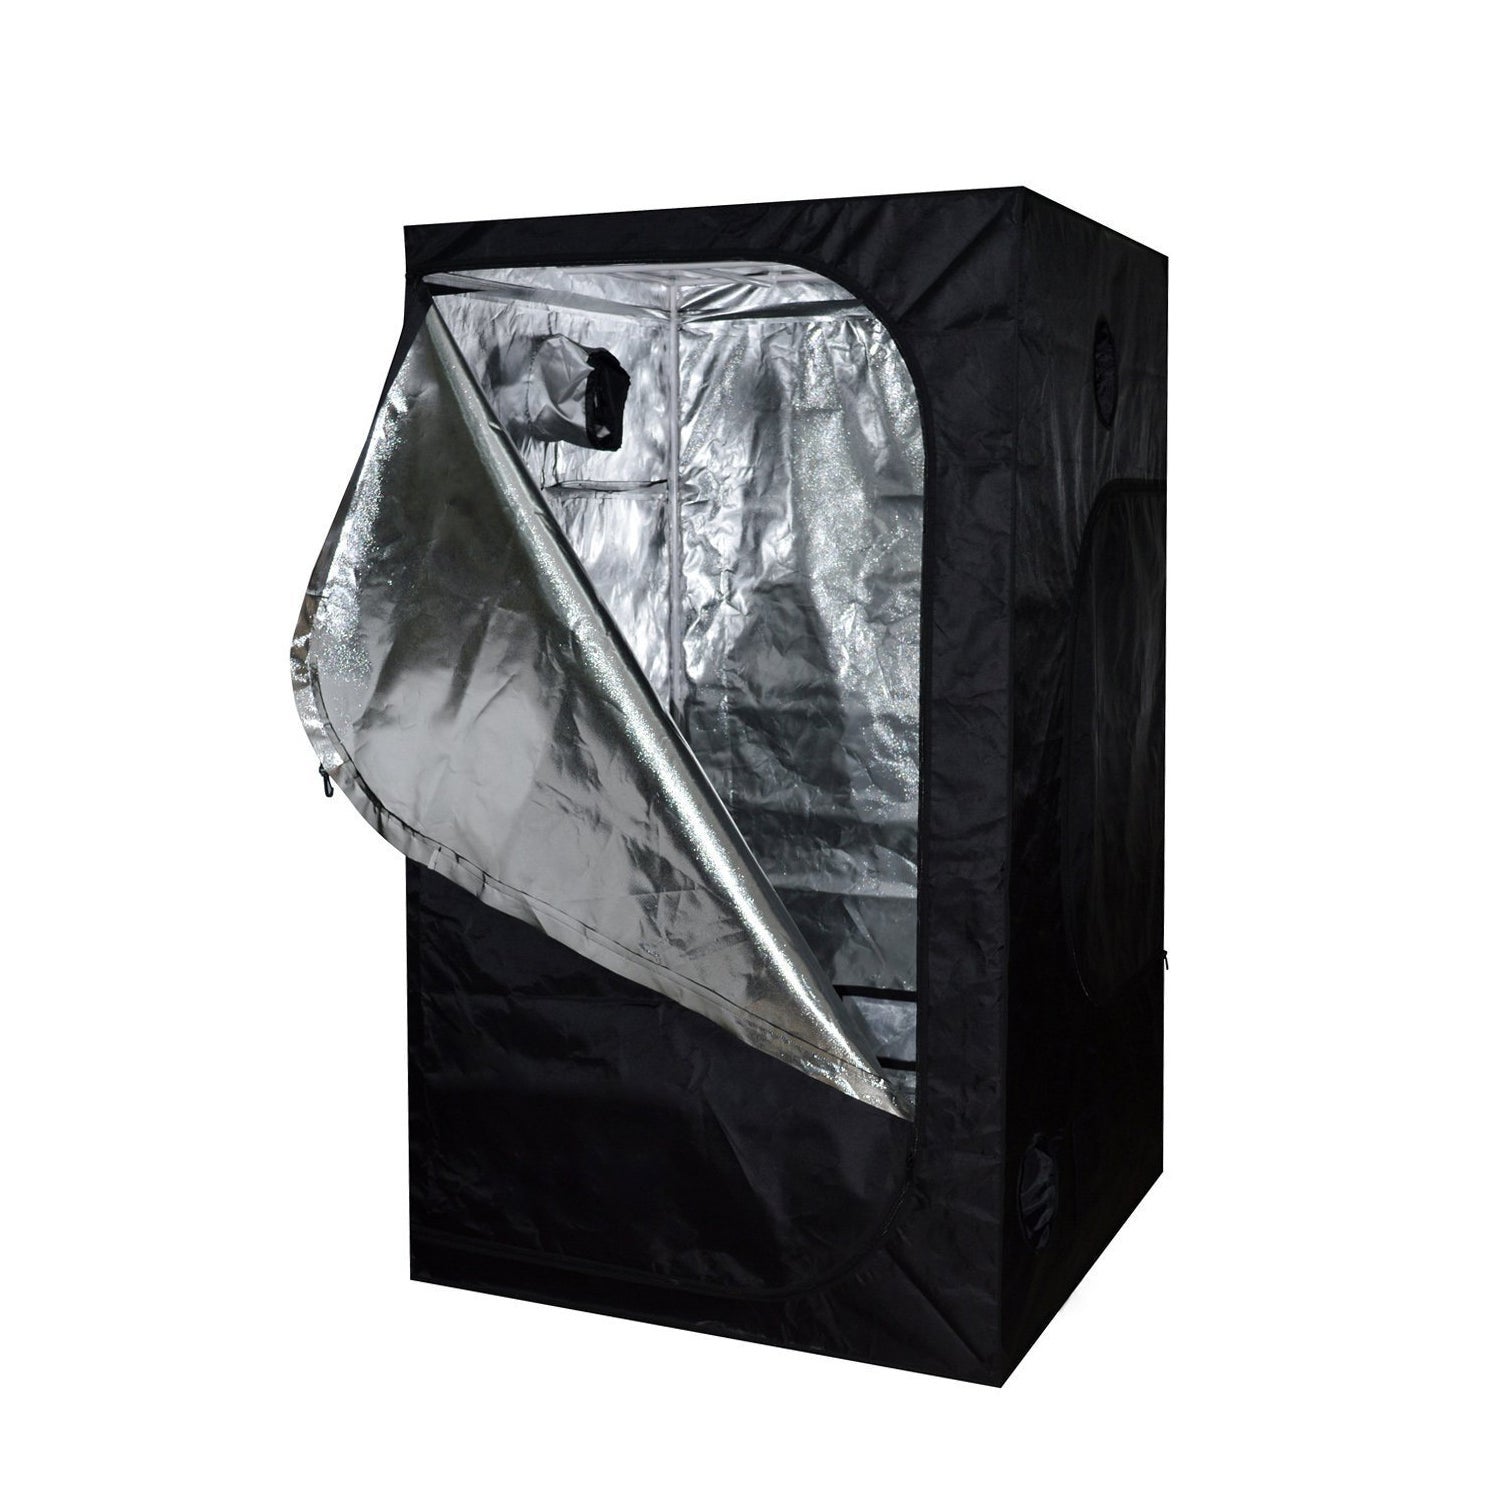 SunStream Hydroponic Grow Tent for Indoor Seedling Plant Growing, Water-Resistant